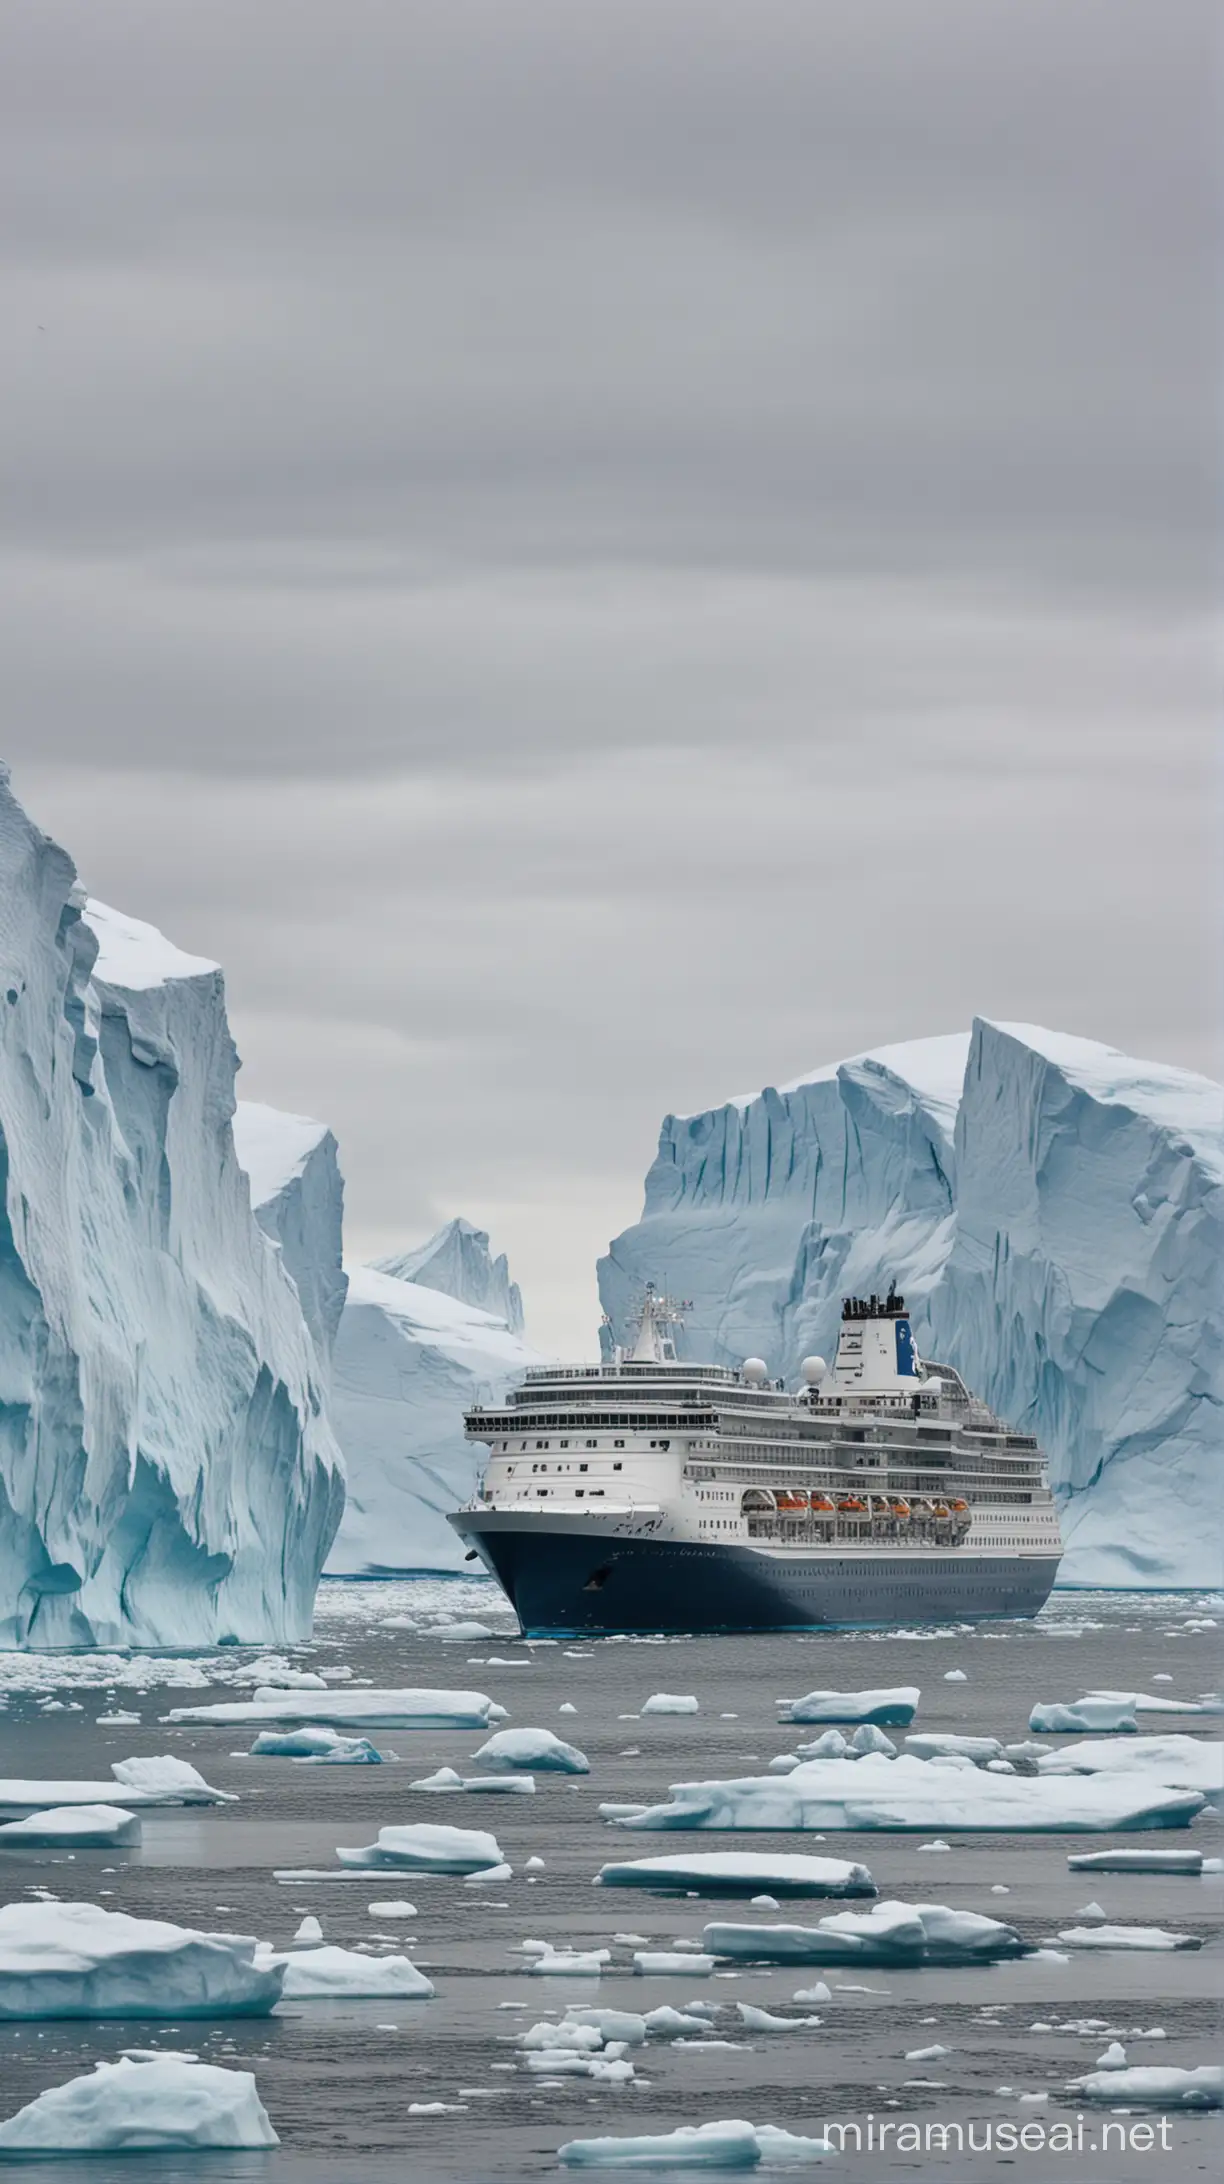 Cruise Ship Passing Icebergs in Close Proximity